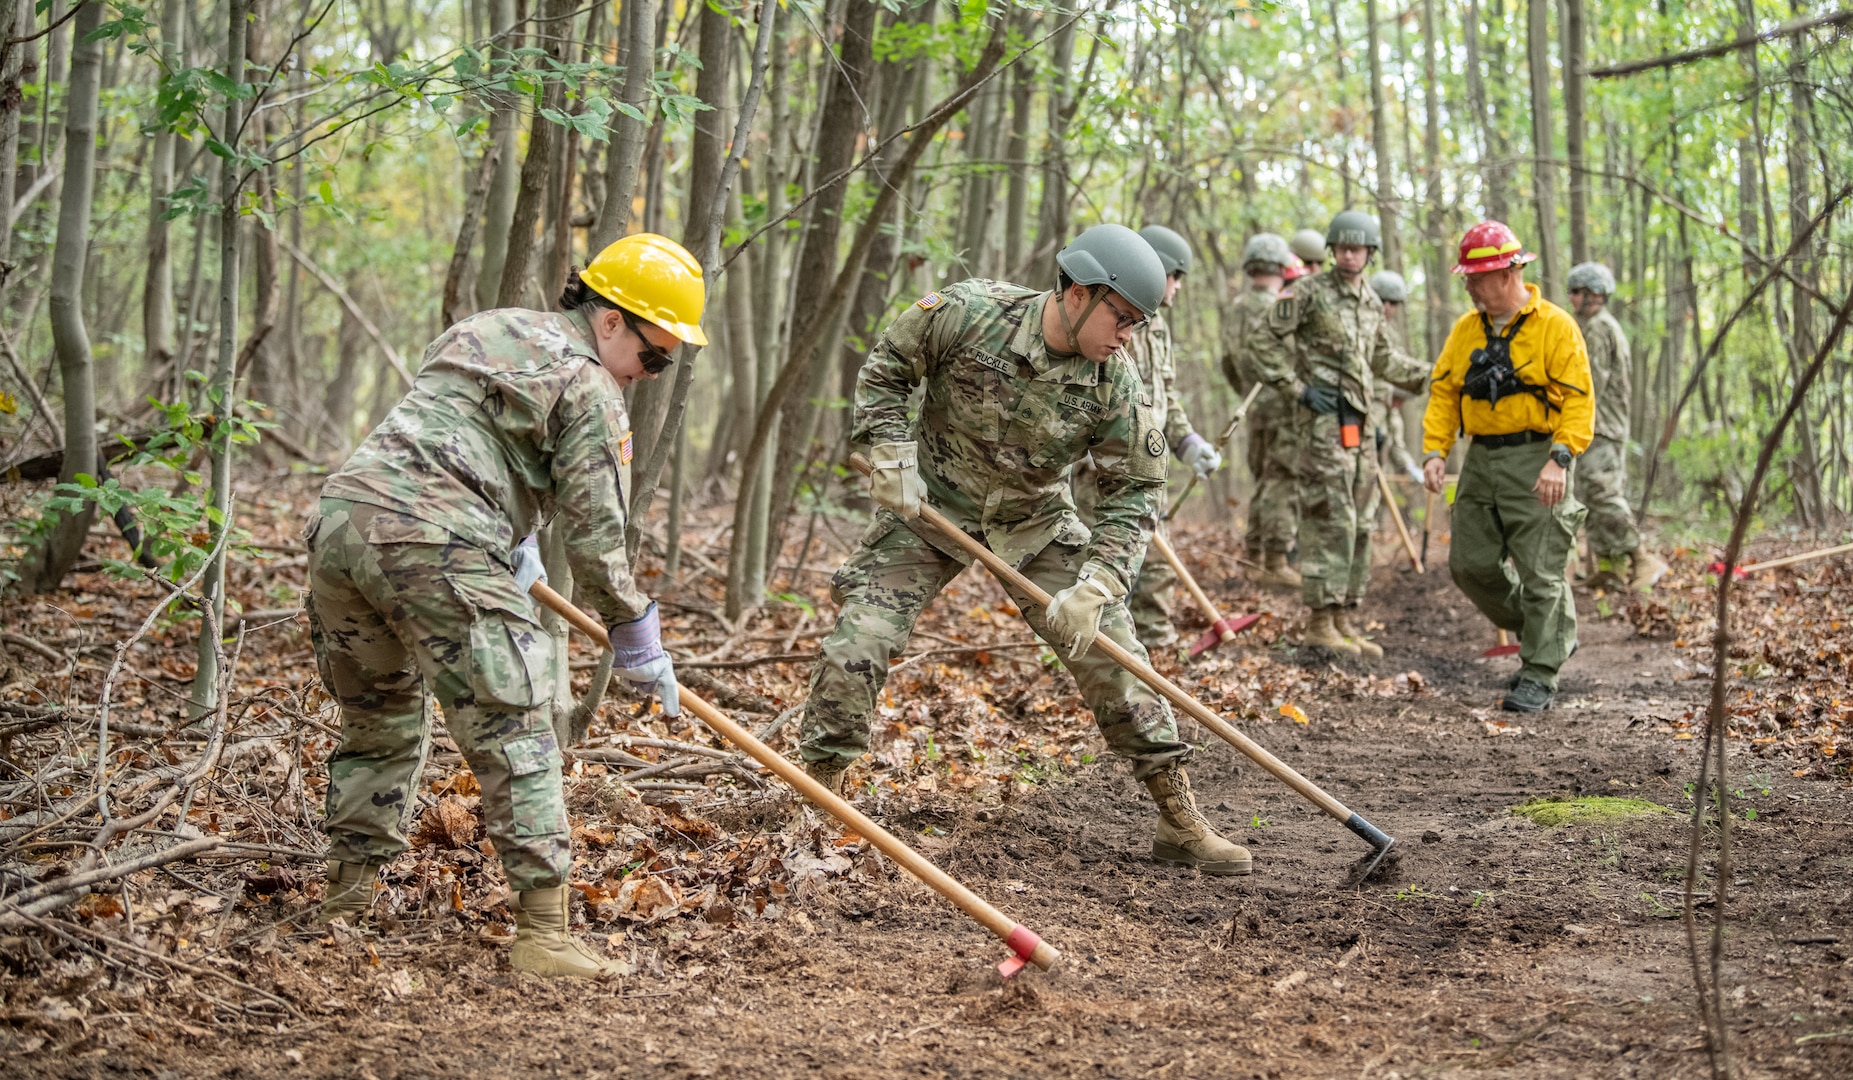 Soldiers of the West Virginia Army National Guard’s 249th Army Band work to remove debris from a fire line during basic wildland fire suppression training, conducted by the West Virginia Division of Forestry in Morgantown, West Virginia, Oct. 3, 2019. The training covered basic wildland fire fighting techniques including understanding fire behavior, suppression tactics and techniques, crew organization, communications, and crew safety and awareness, with the goal of providing WNVG Soldiers the basic skills and experience to operate on a fire line side-by-side with experienced Division of Forestry personnel. (U.S. Army National Guard photo by Edwin L. Wriston)